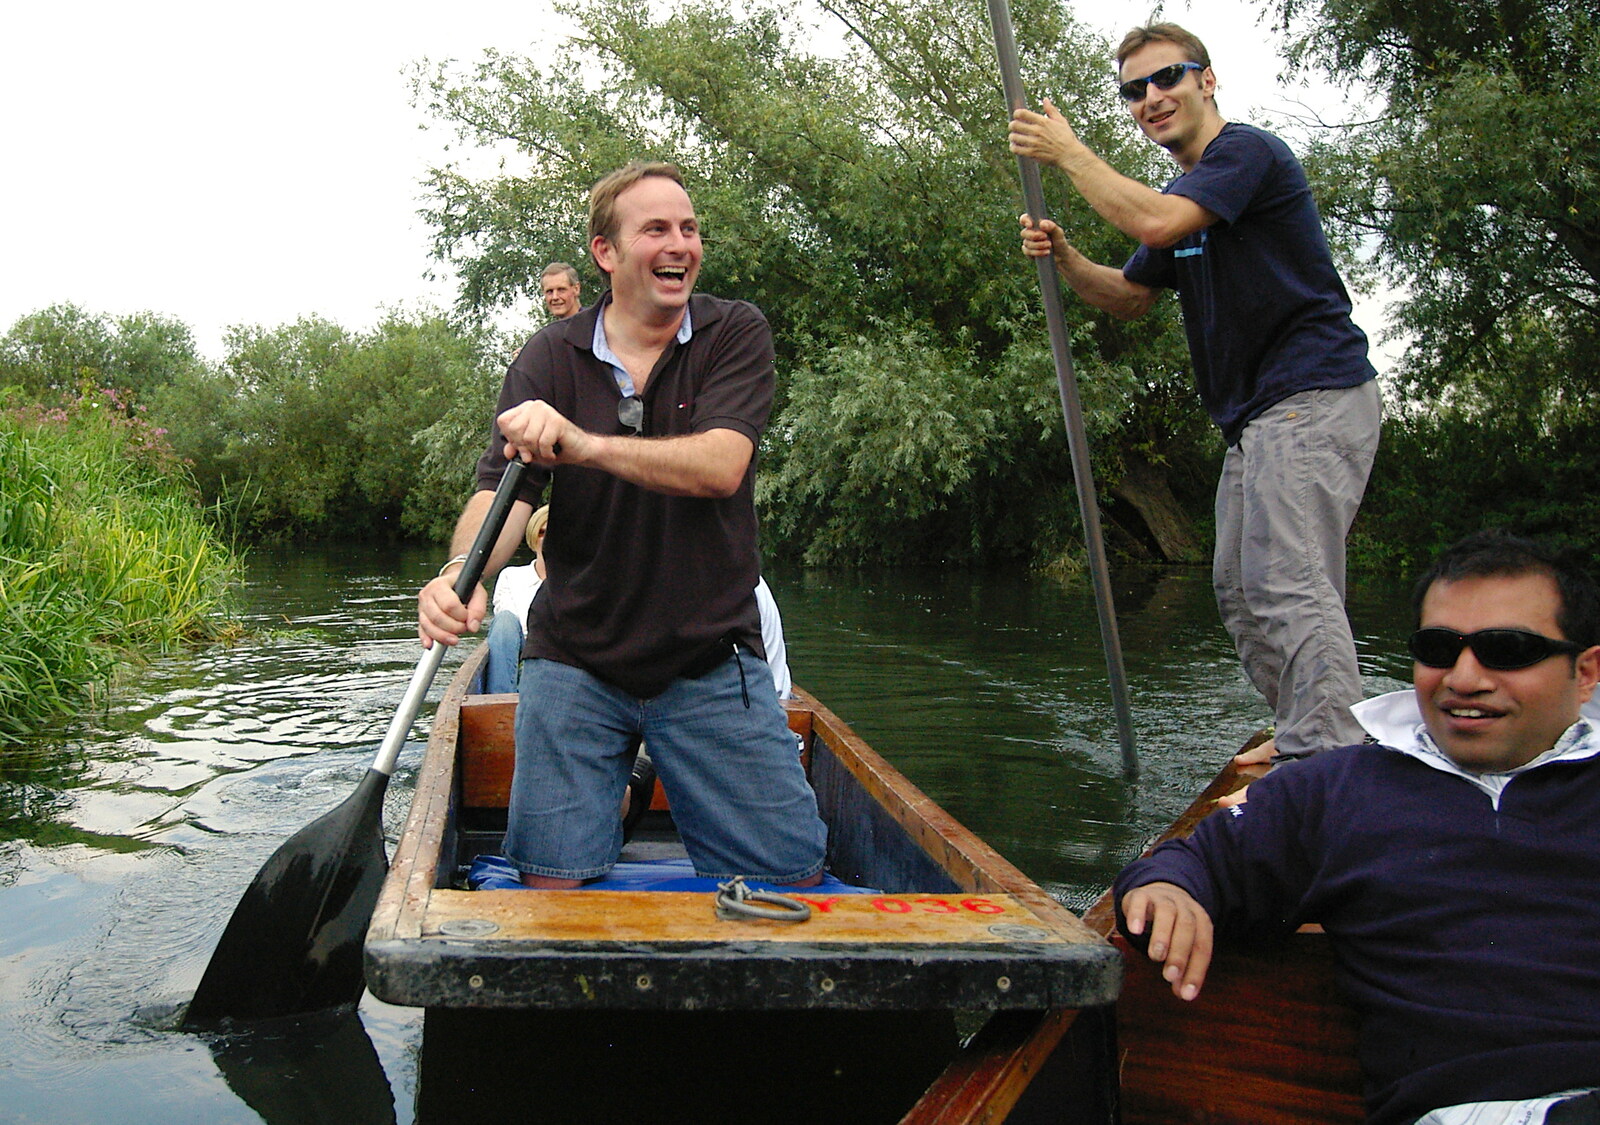 It all gets a bit competitive from Qualcomm goes Punting on the Cam, Grantchester Meadows, Cambridge - 18th August 2005